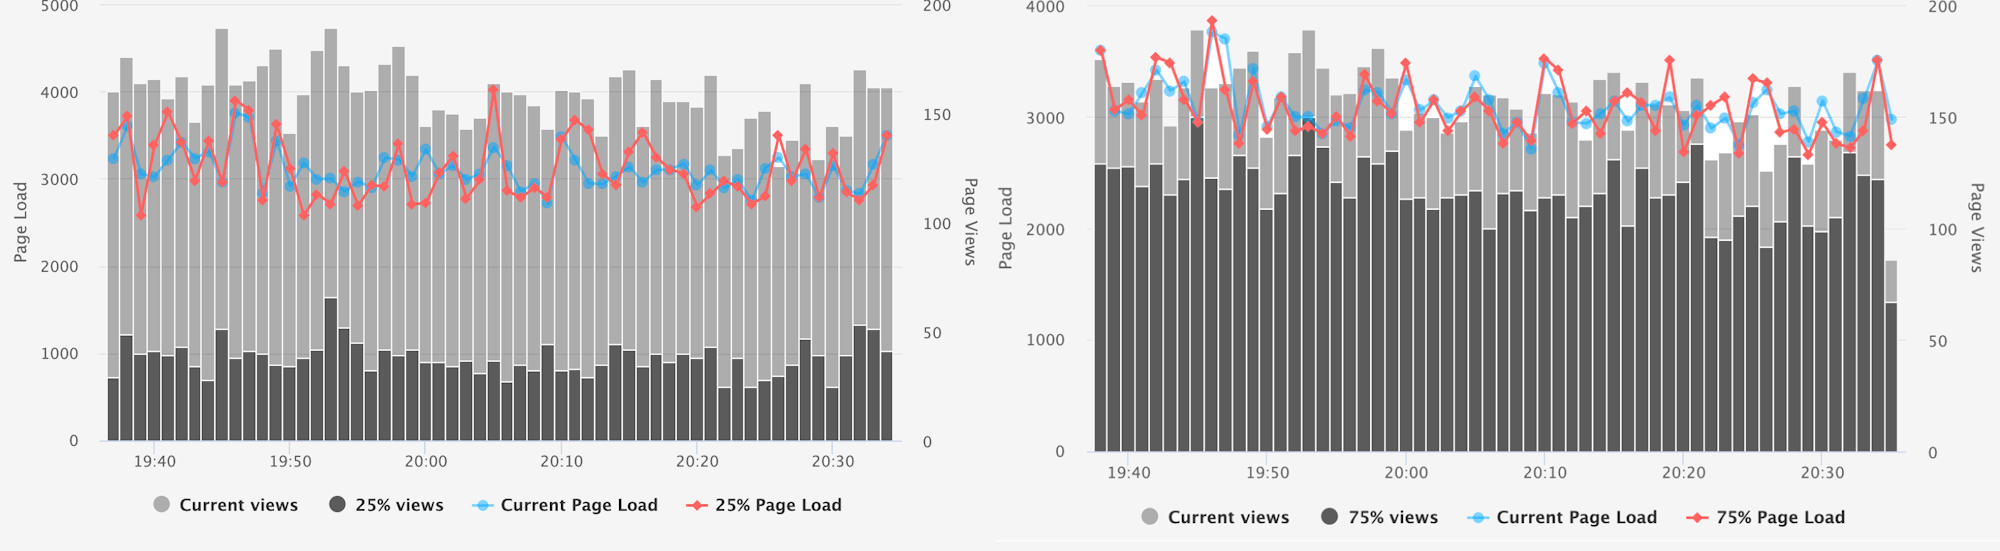 Time series comparison of realtime data for a medium site.